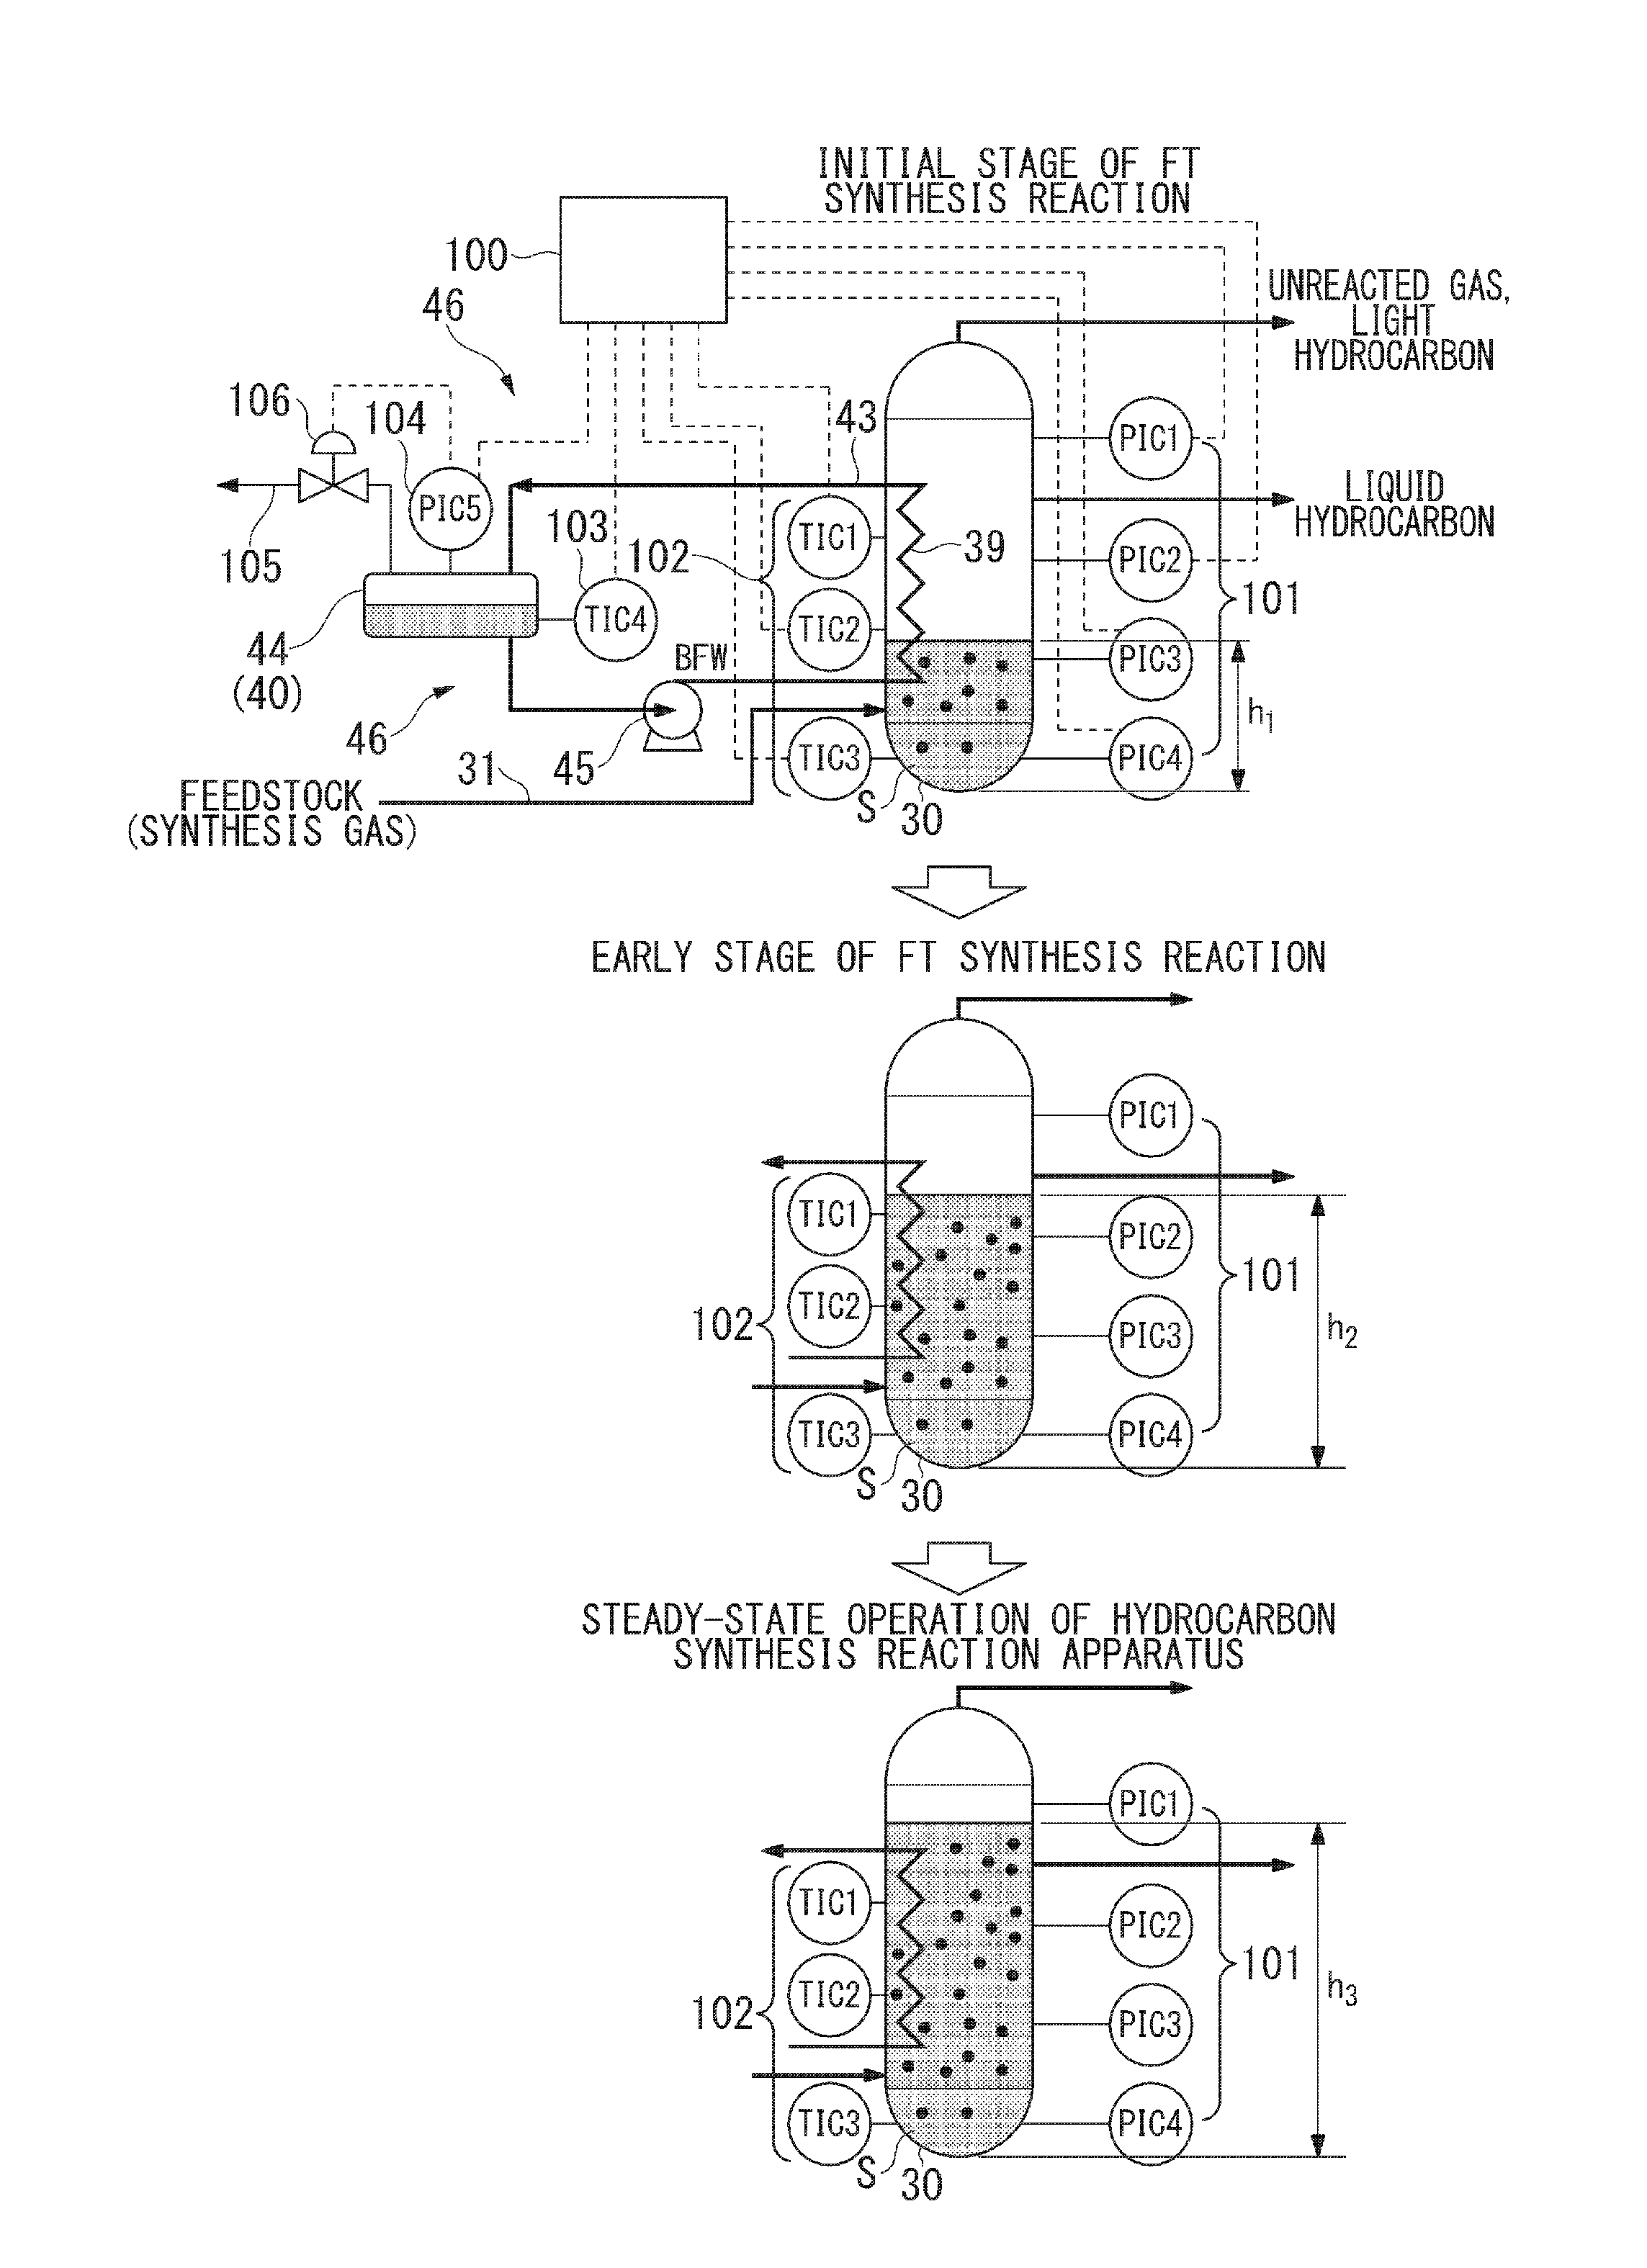 Start-up method of hydrocarbon synthesis reaction apparatus